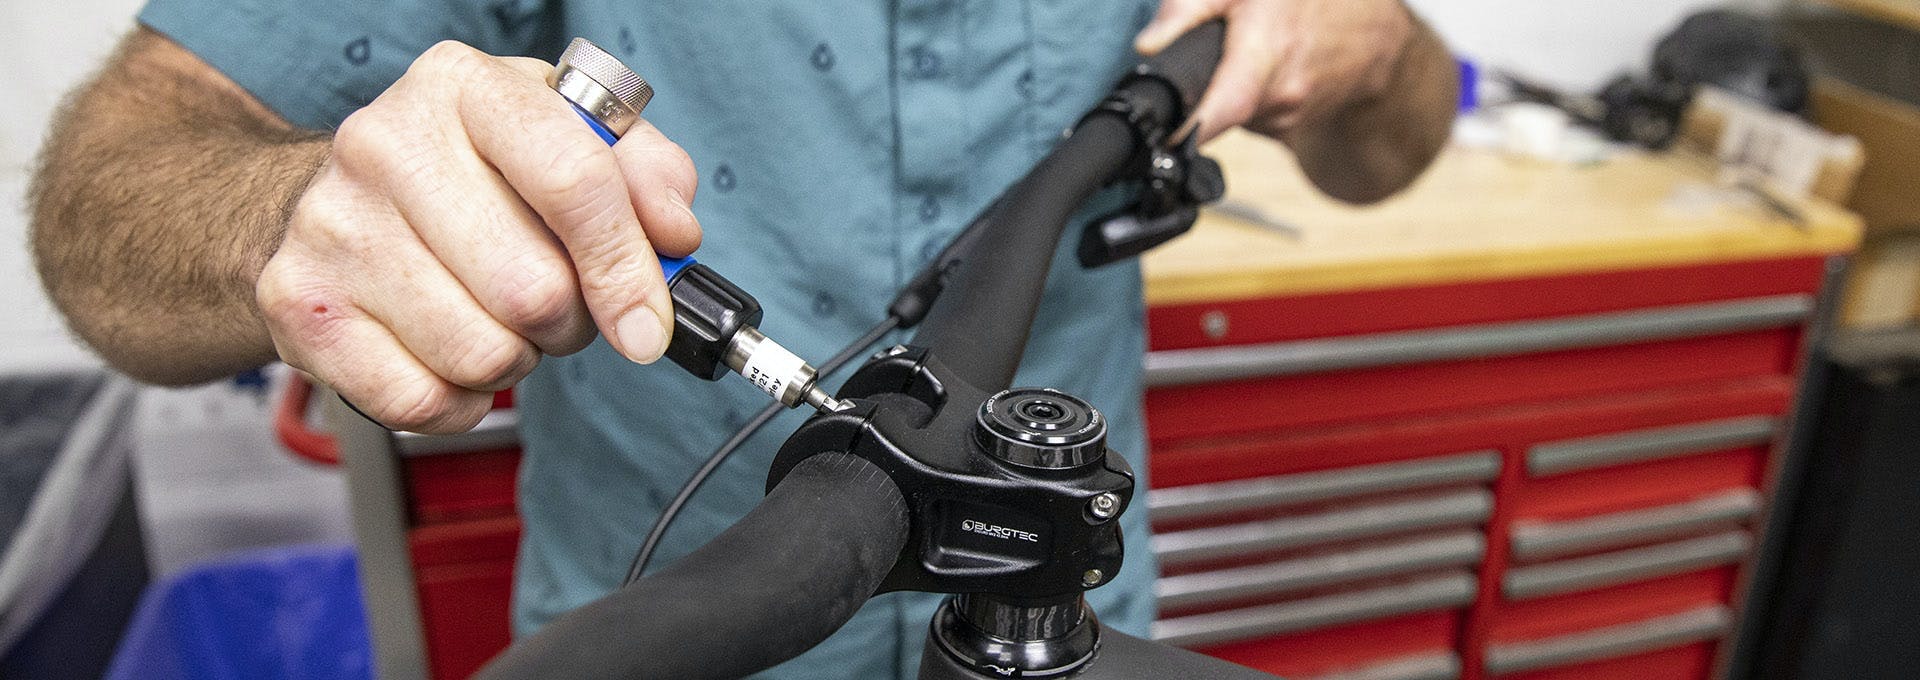 A bicycle mechanic tightening the faceplace bolts on a Burgtec Stem